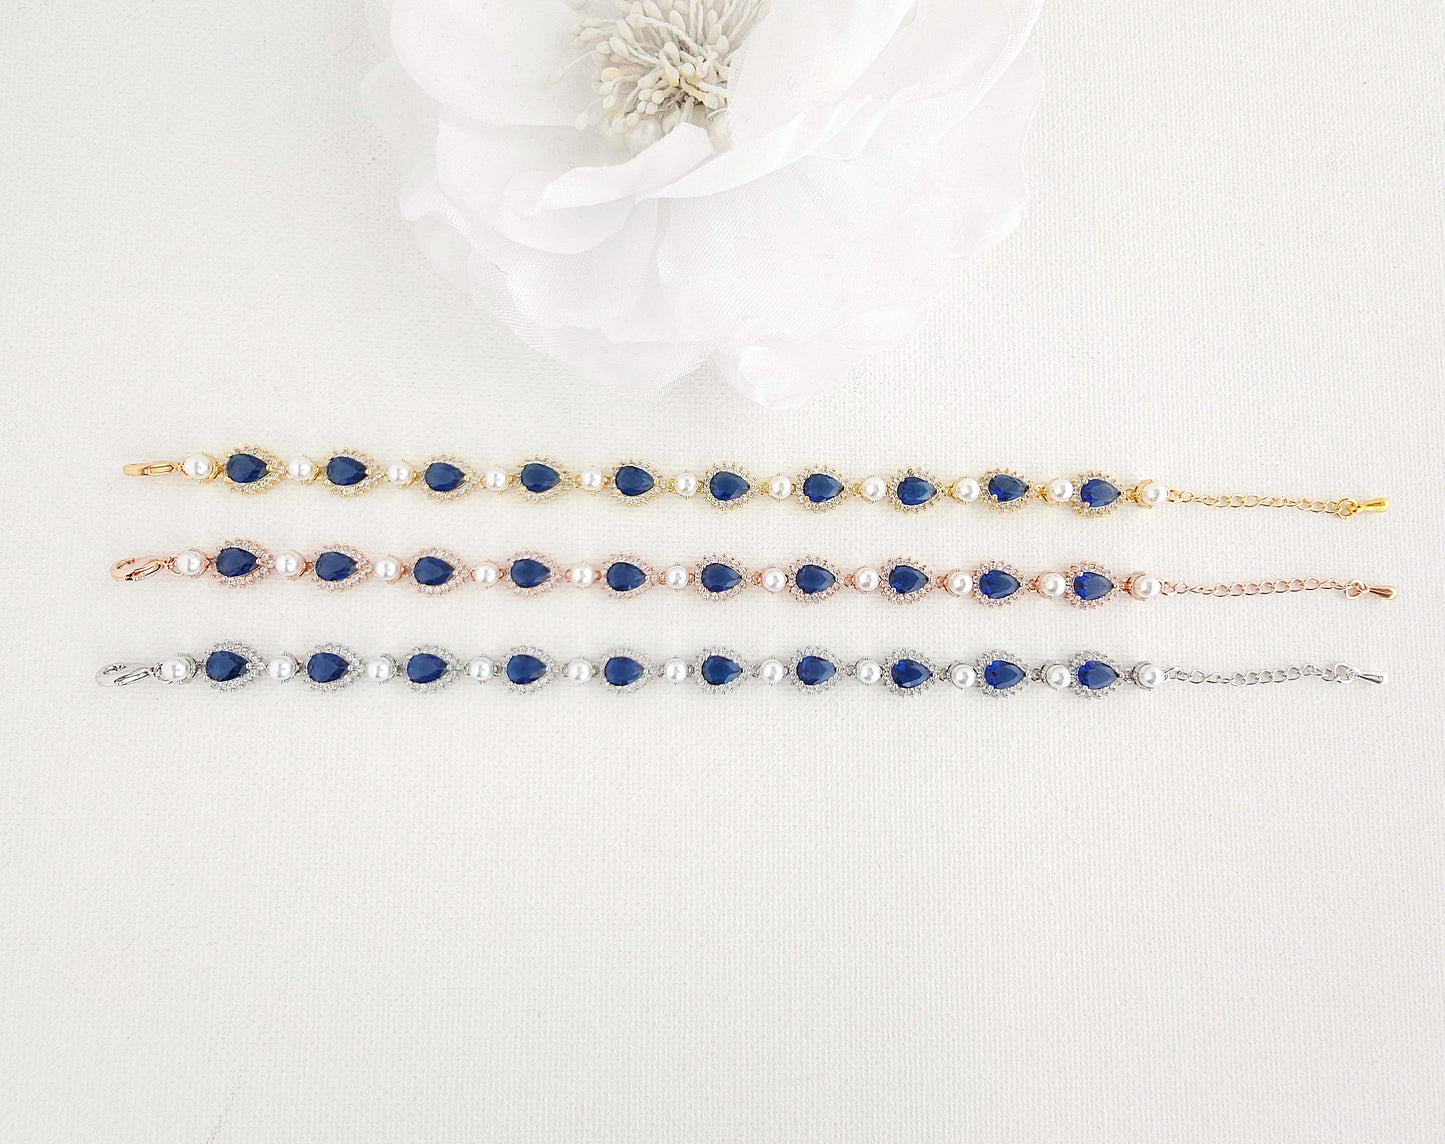 Blue Bracelet with Pearls for Weddings & Events- Aoi